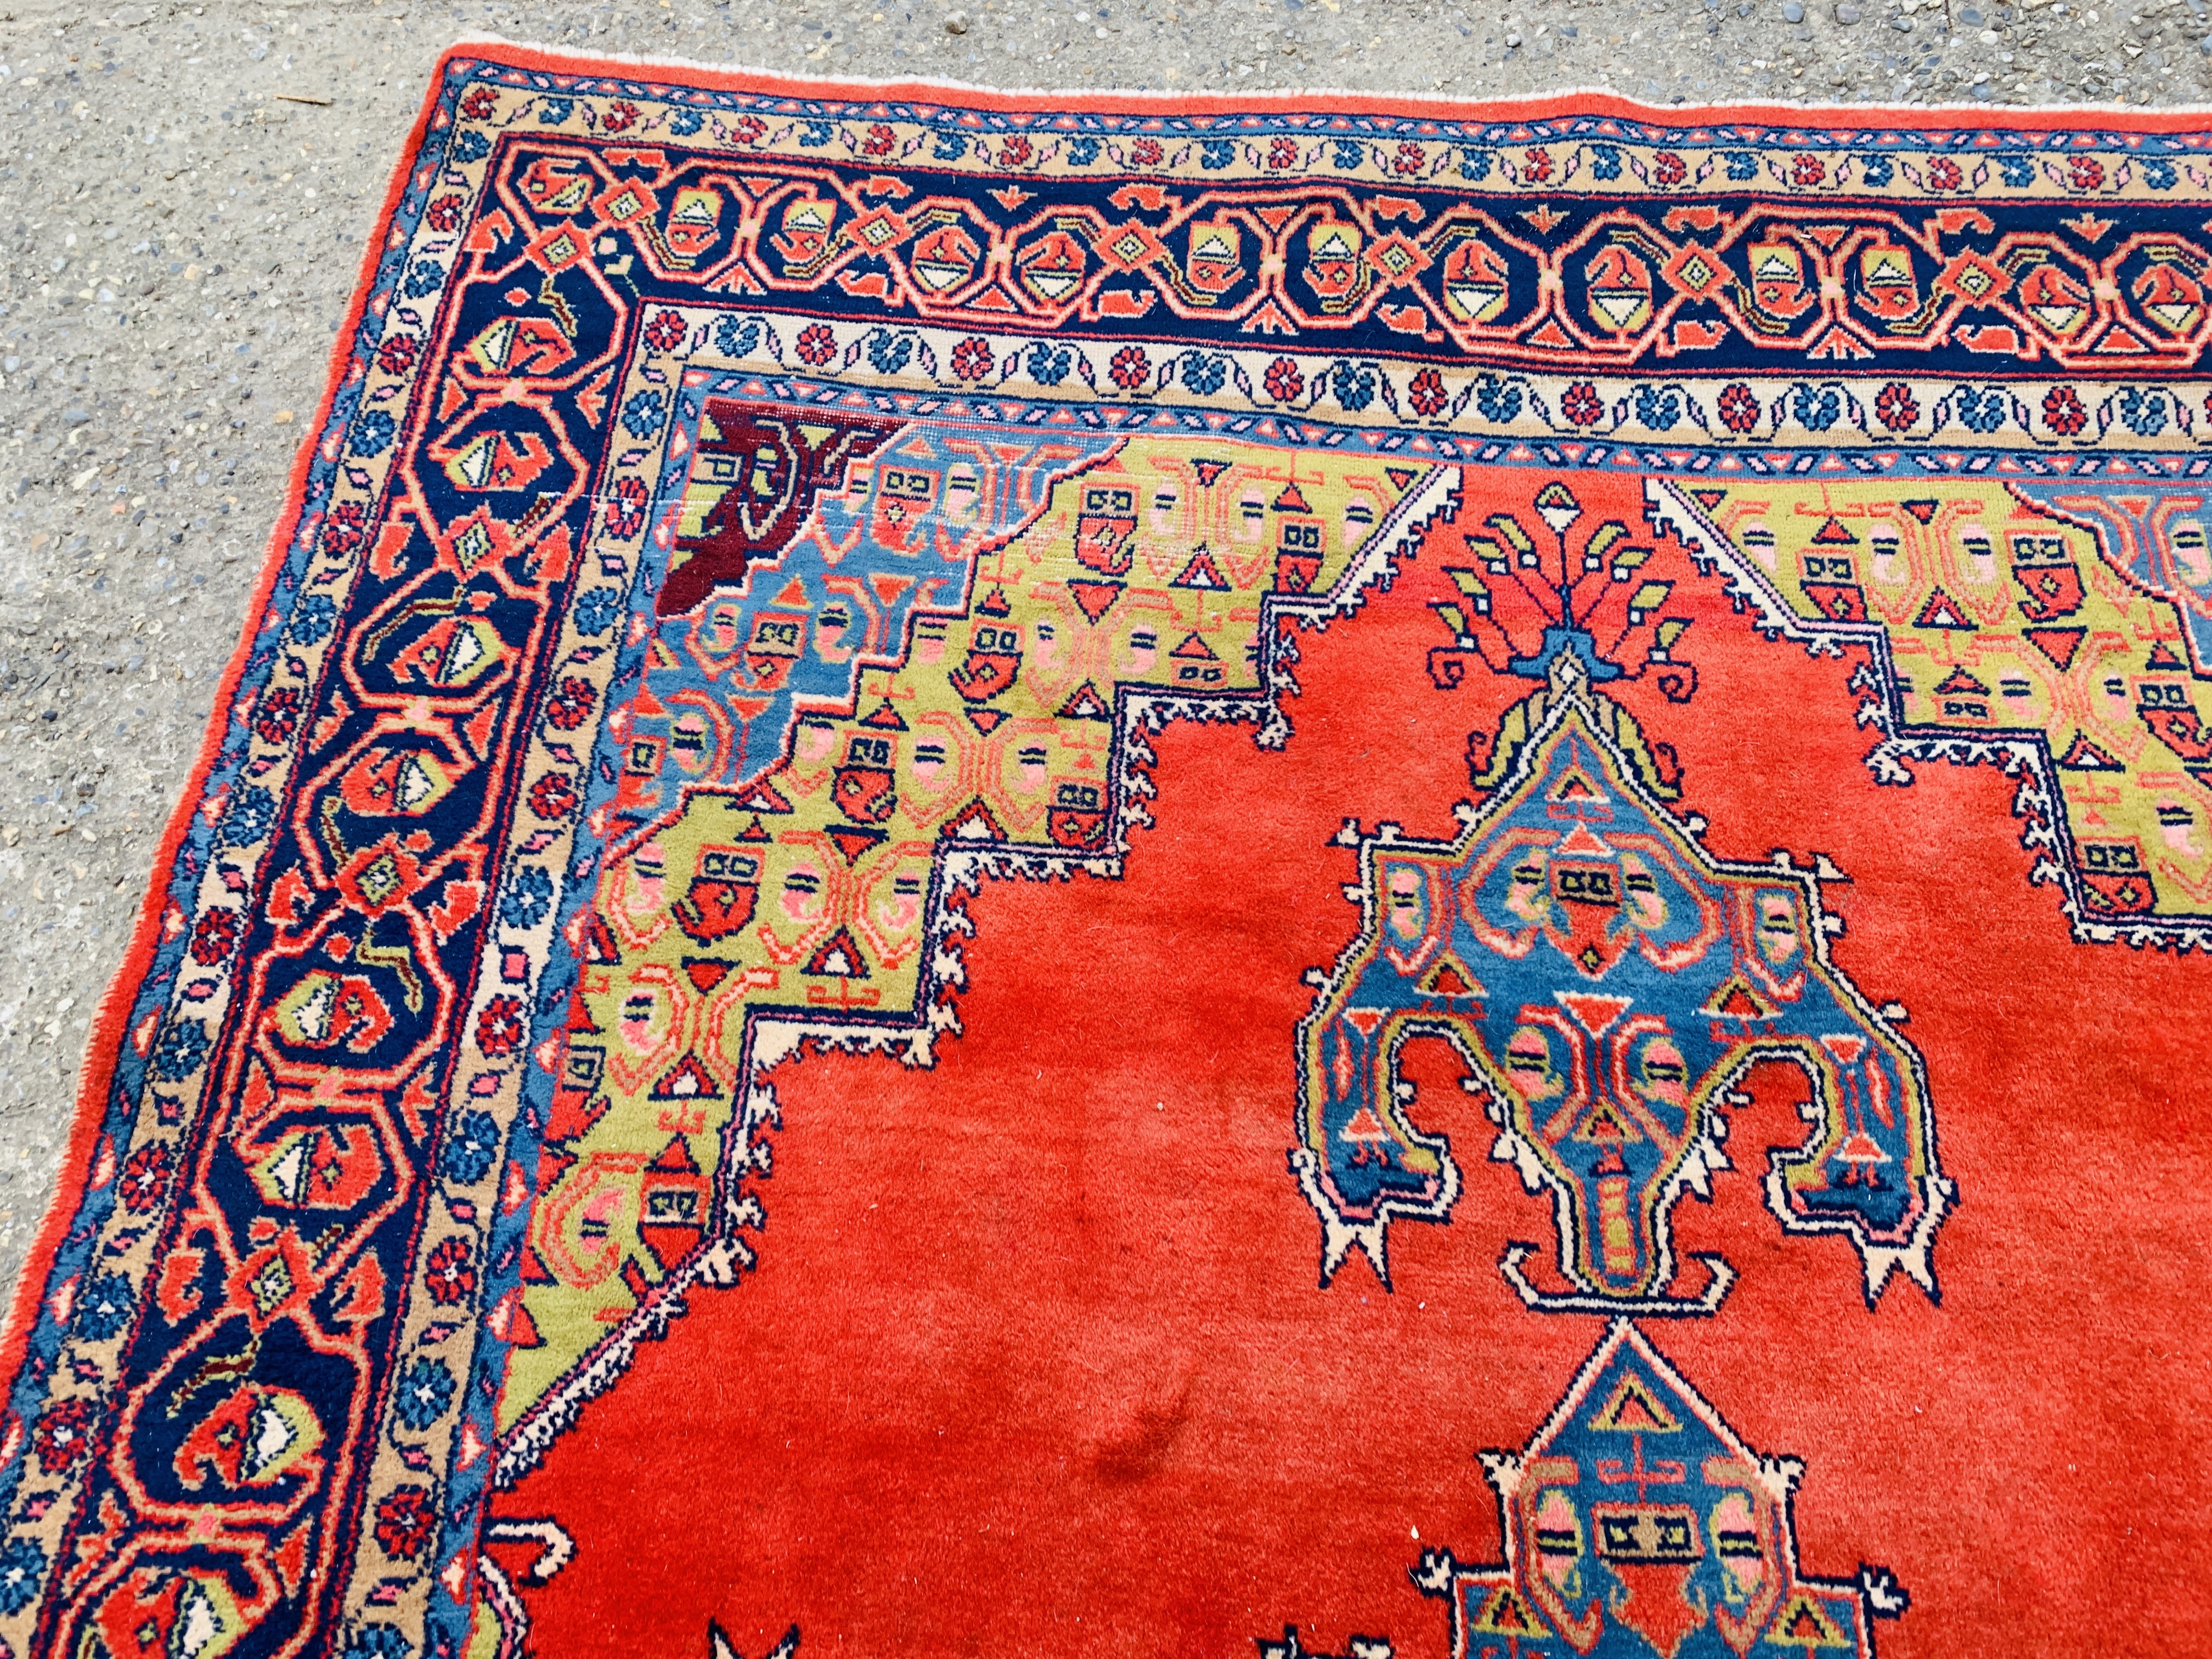 A GOOD QUALITY RED / BLUE PATTERNED EASTERN CARPET 3.3M X 3.15M. - Image 6 of 11